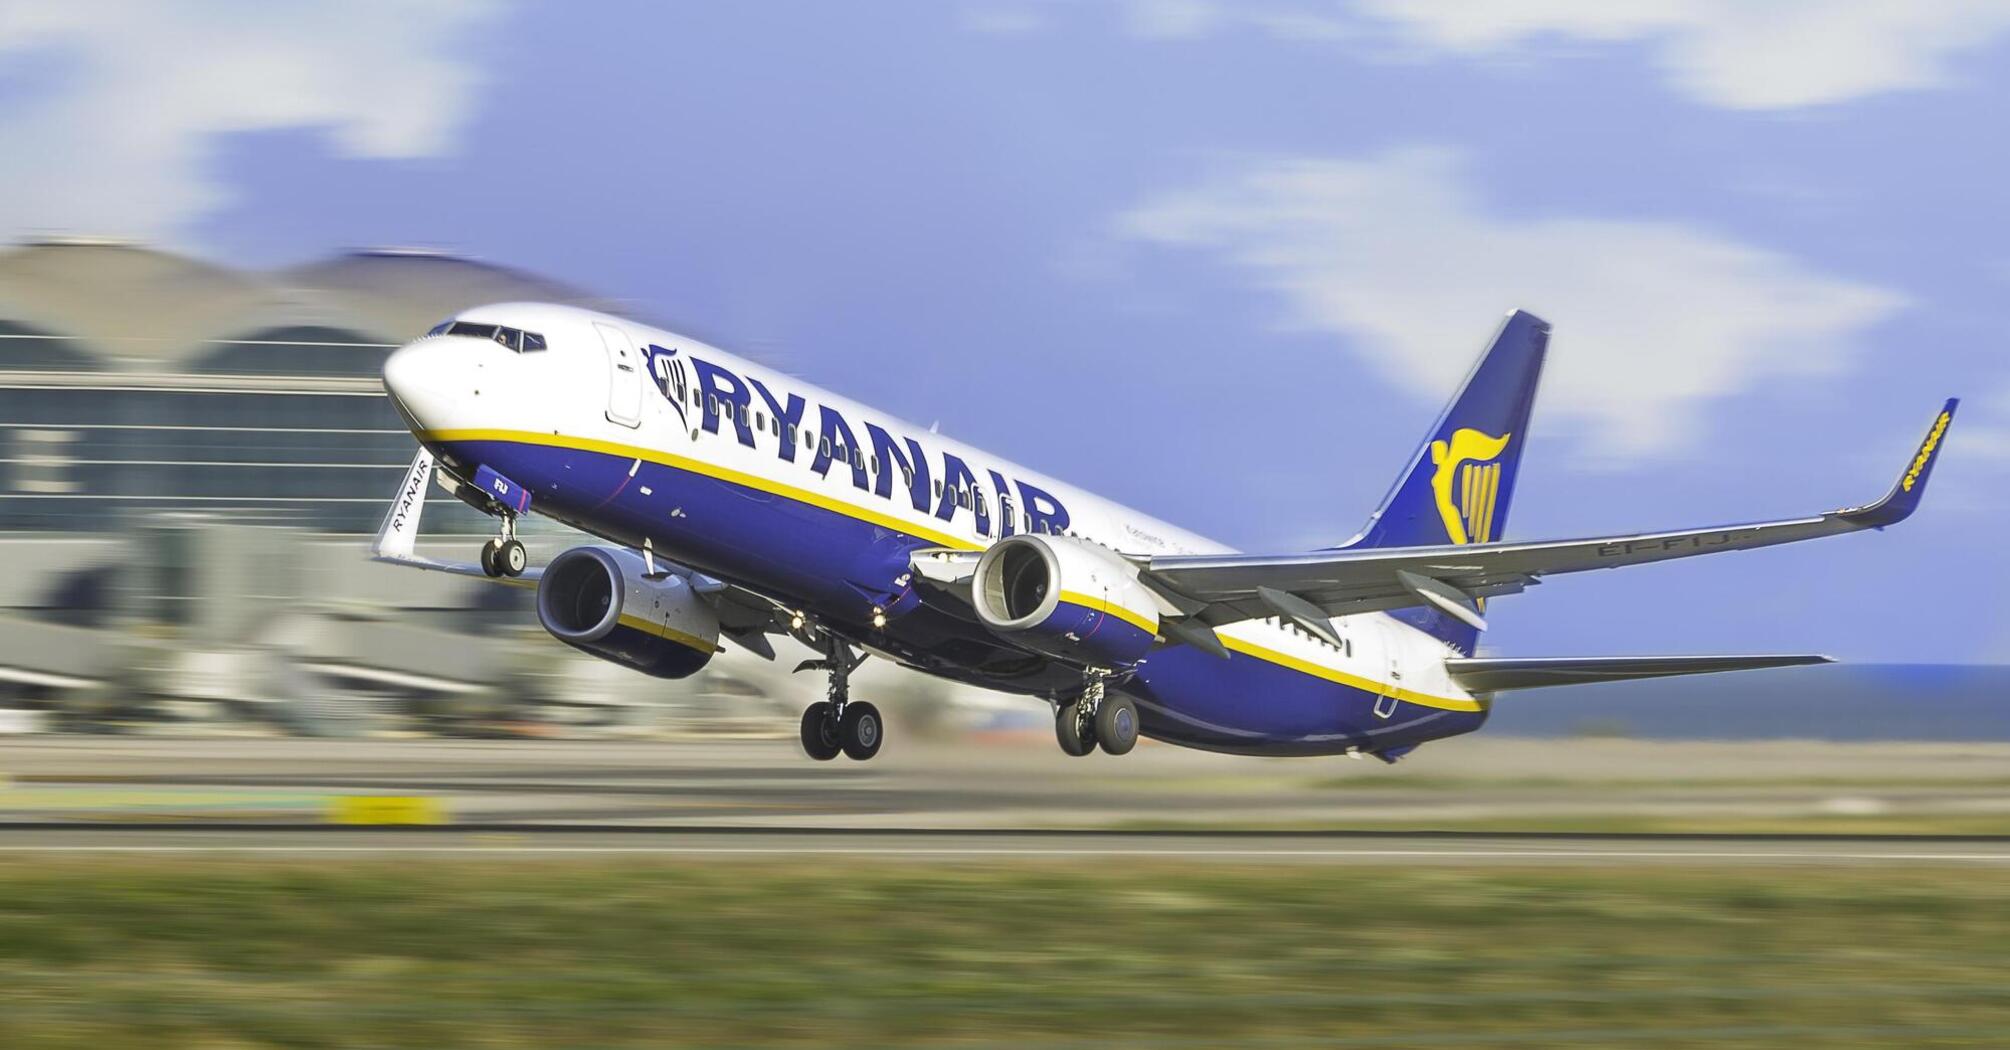 Ryanair has added new flights from Cardiff to Alicante and Tenerife